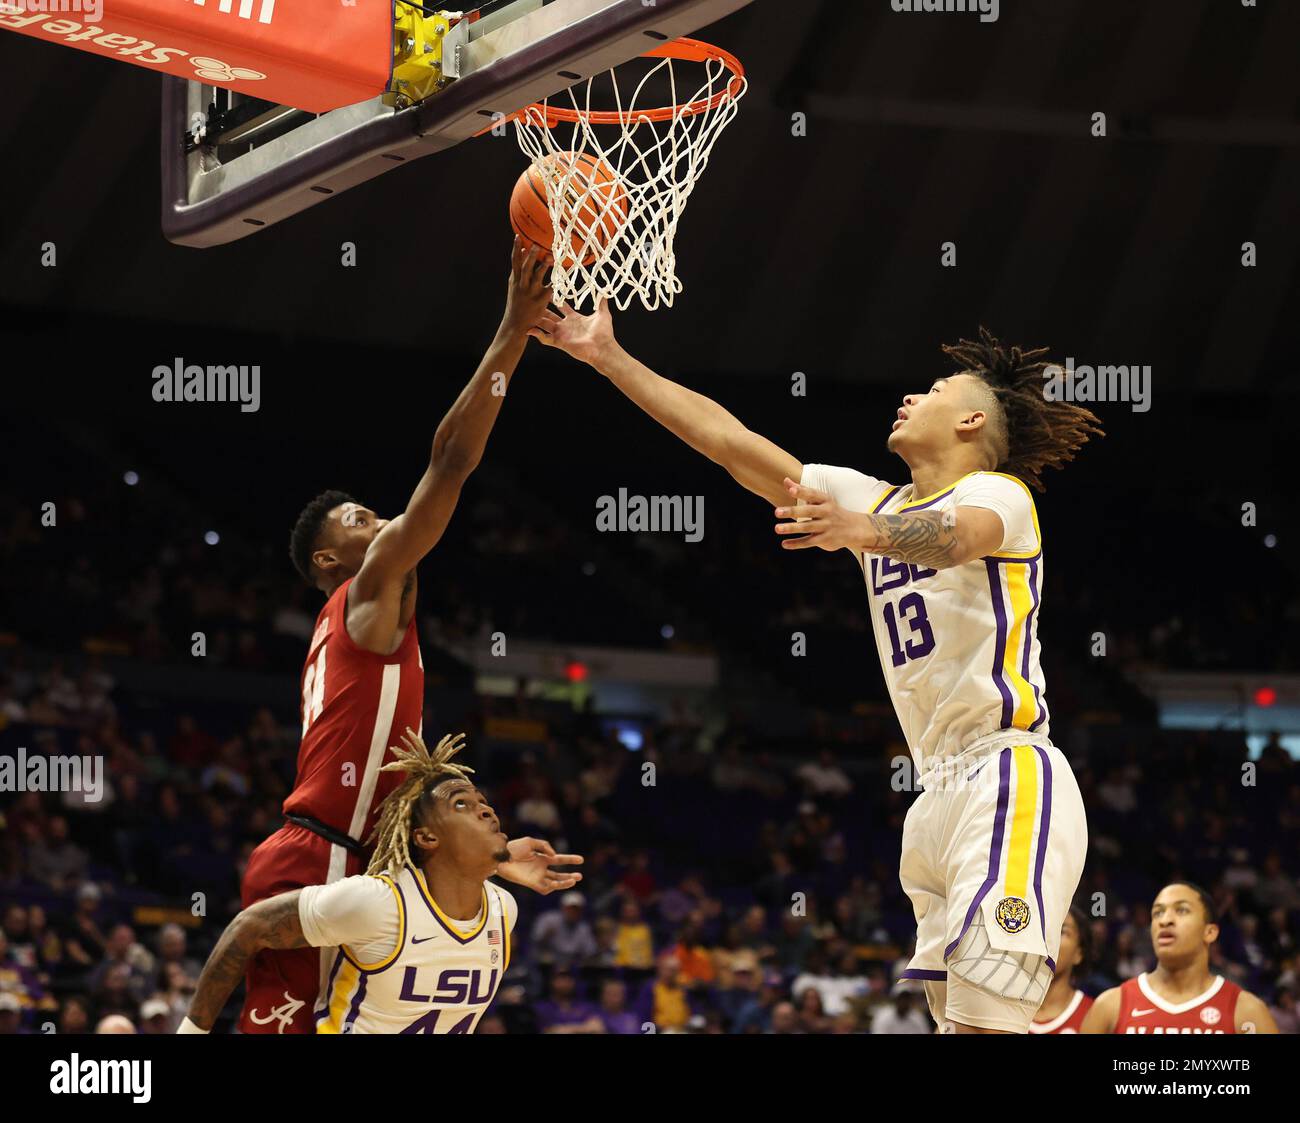 Baton Rouge, USA. 04th Feb, 2023. Alabama Crimson Tide forward Brandon Miller (24) and LSU Tigers forward Jalen Reed (13) both reach for the ball during a men's college basketball game at the Pete Maravich Assembly Center in Baton Rouge, Louisiana on Saturday, February 4, 2023. (Photo by Peter G. Forest/Sipa USA) Credit: Sipa USA/Alamy Live News Stock Photo